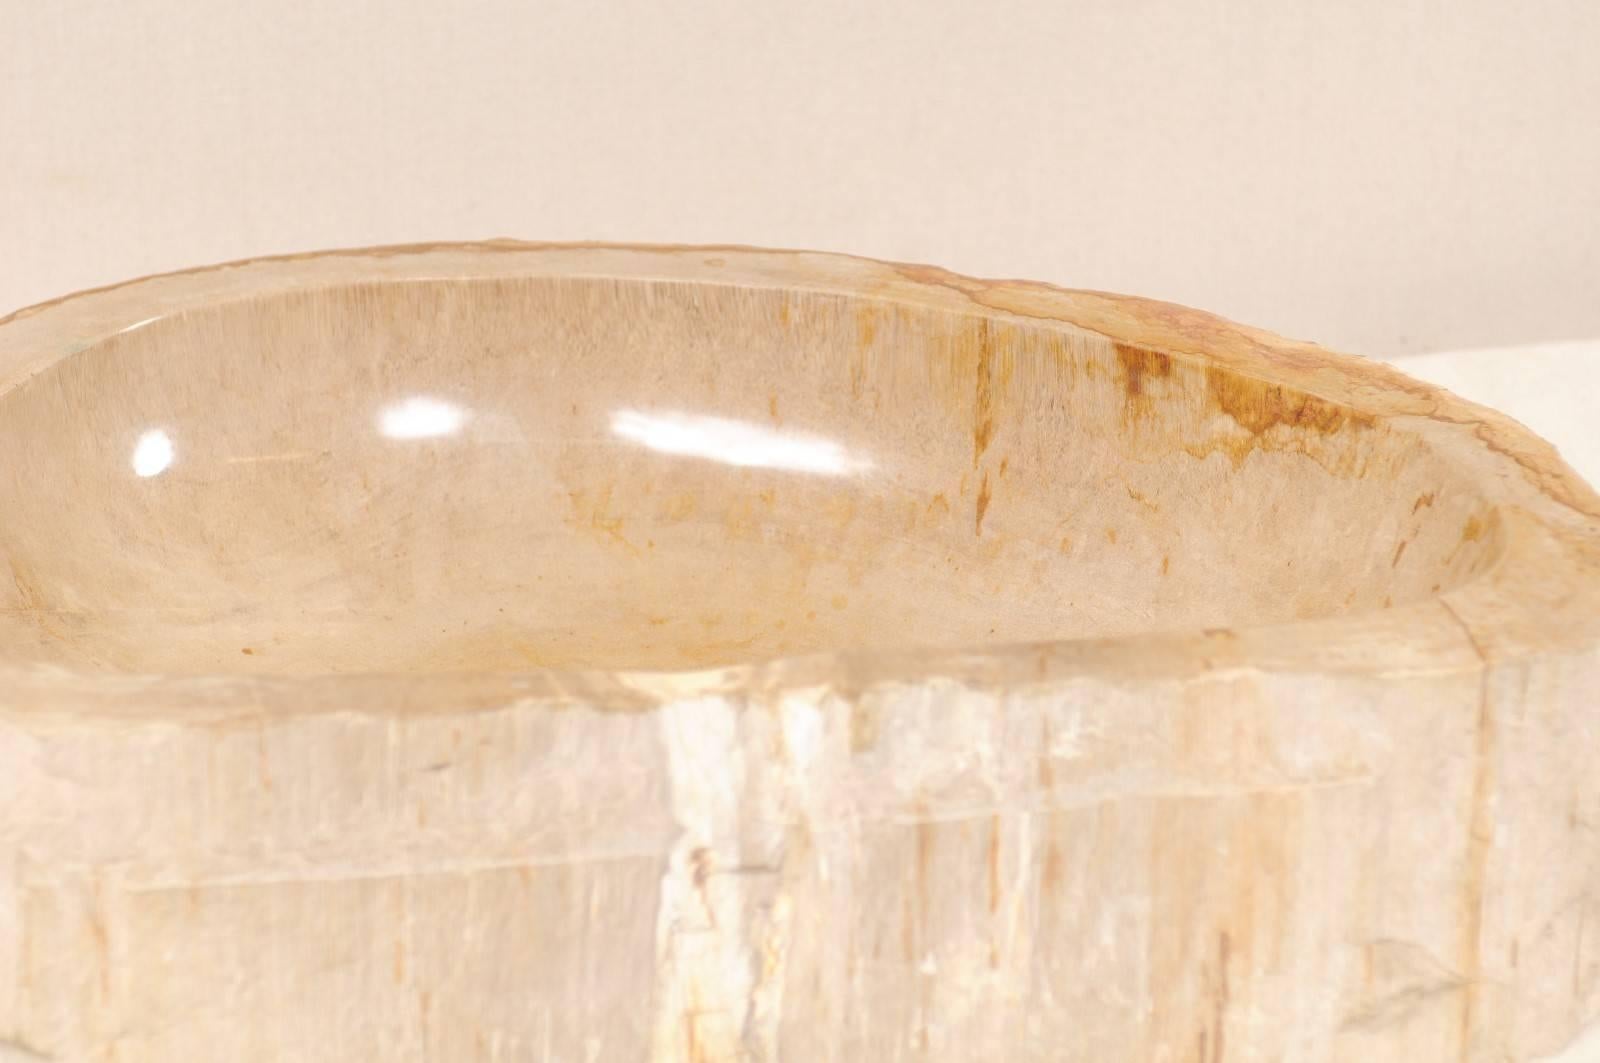 Polished Petrified Wood Sink in Cream and Beige Tones, Perfect for a Vanity 2